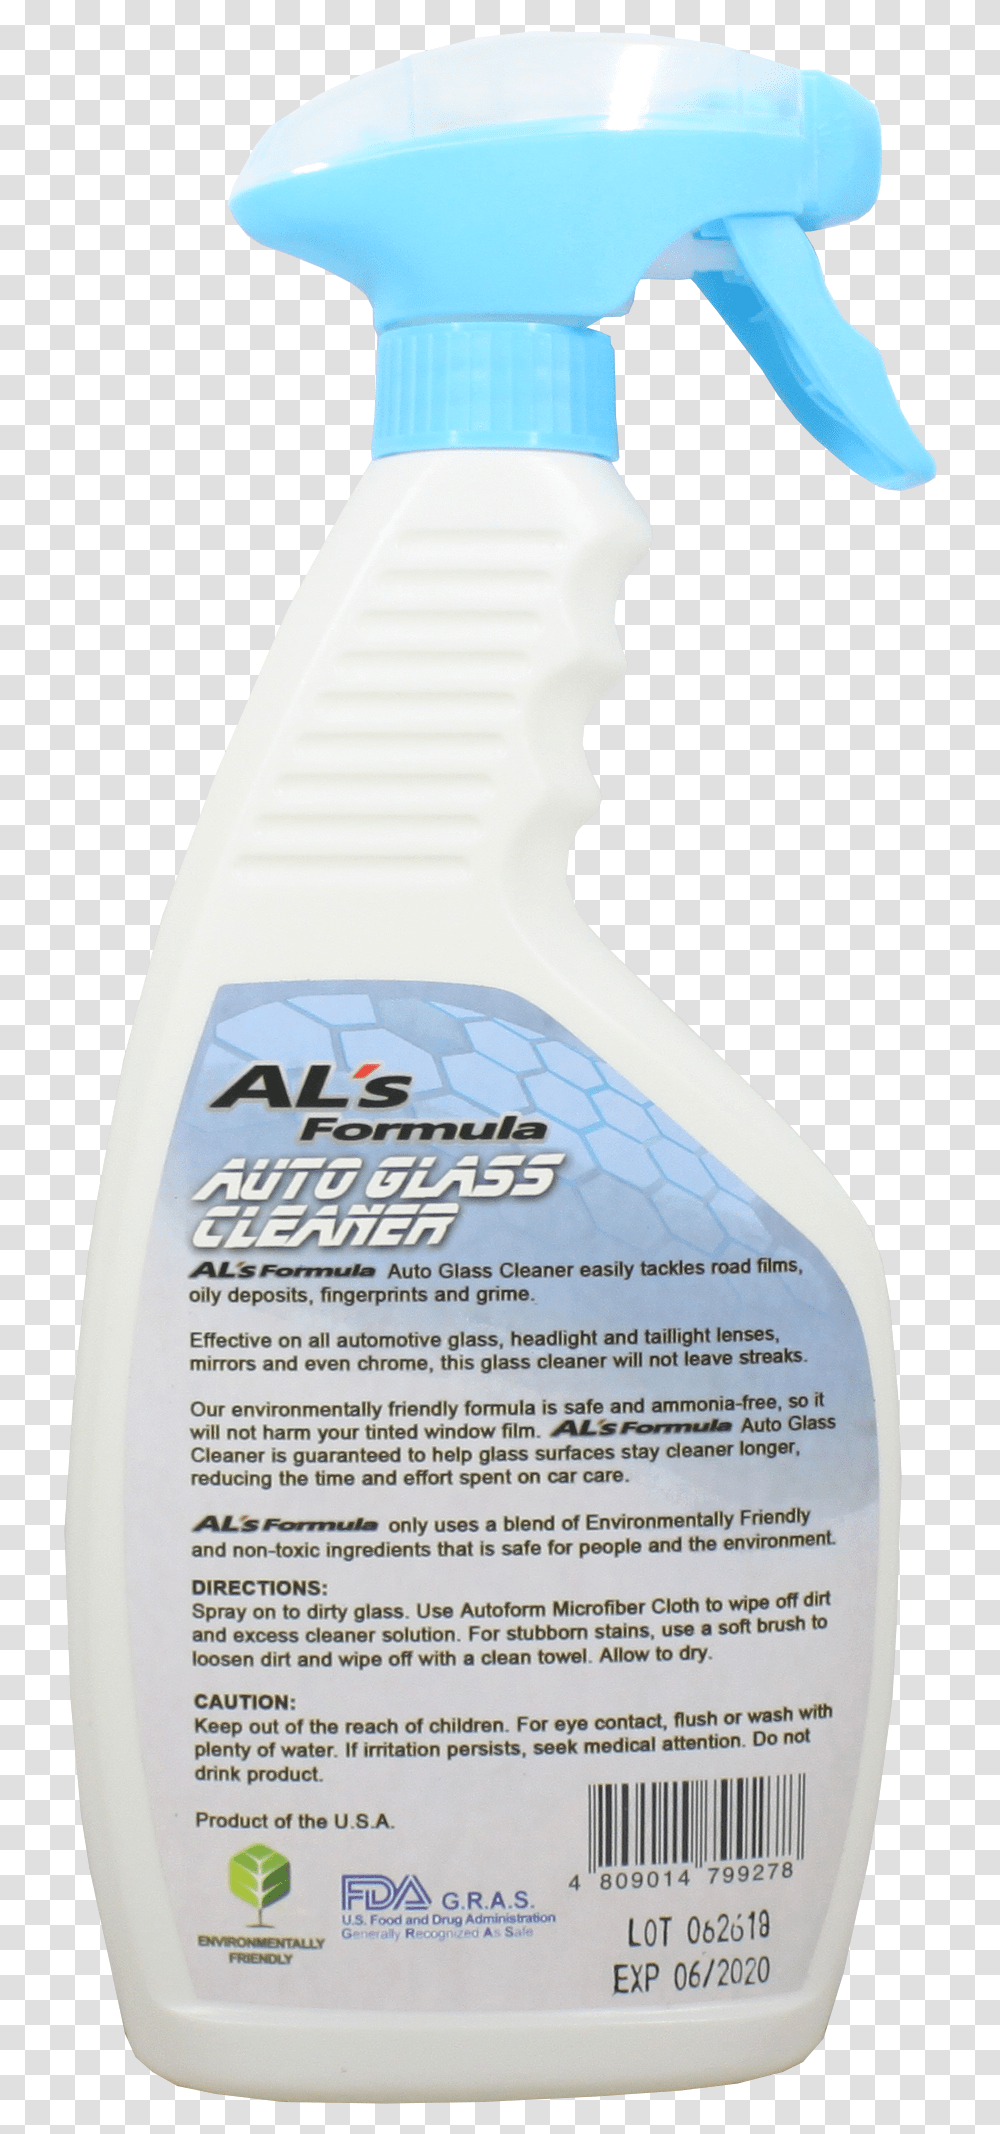 Alquots Formula Auto Glass Cleaner Spray Bottle 500ml Cosmetics, Sunscreen, Shampoo, Aftershave, Lotion Transparent Png